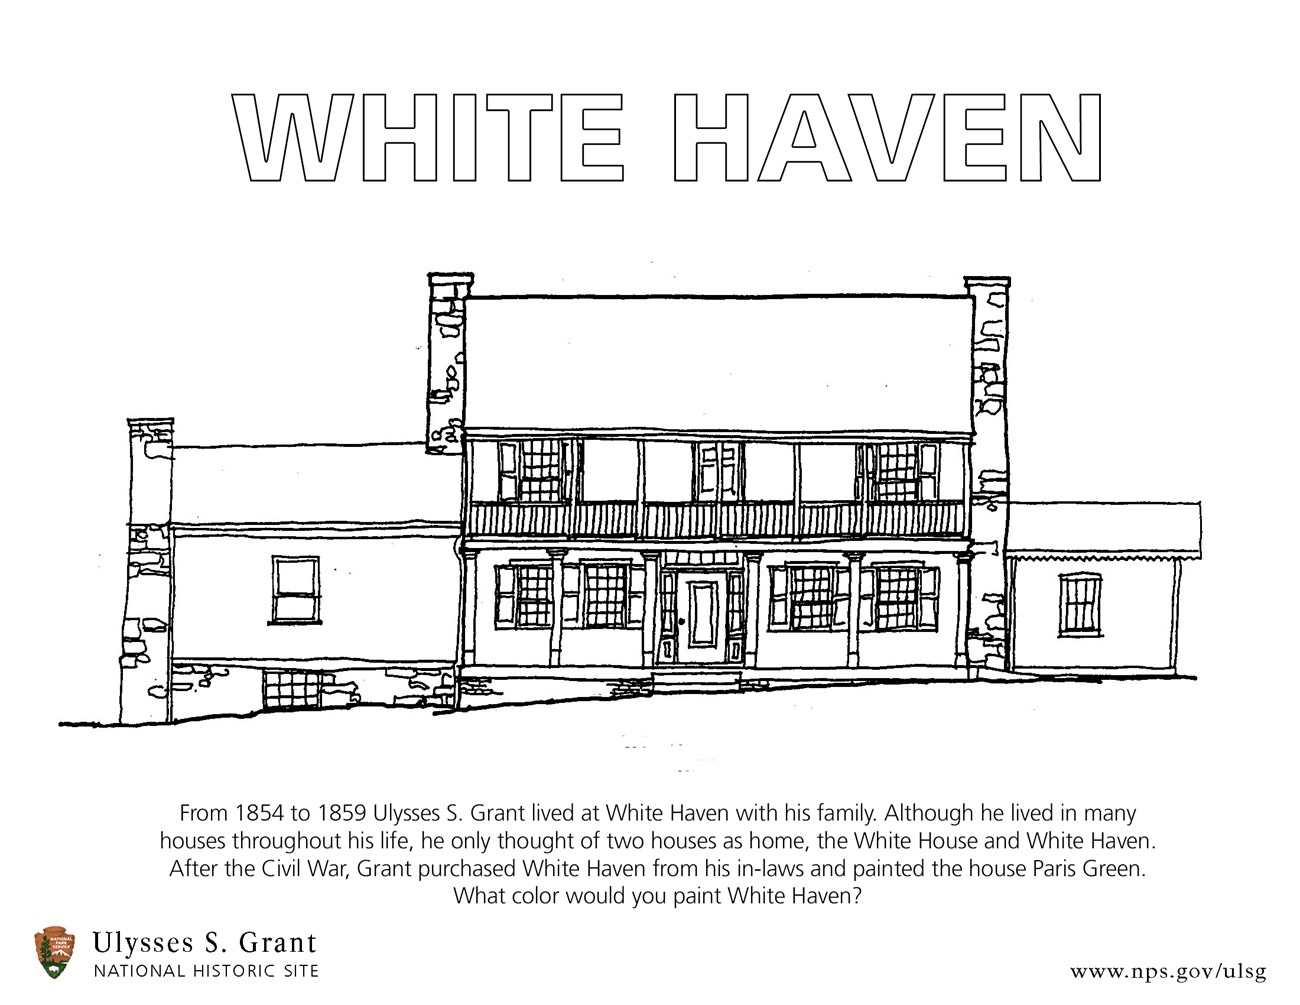 Line drawing or coloring page of a White Haven, a historic two story frame house